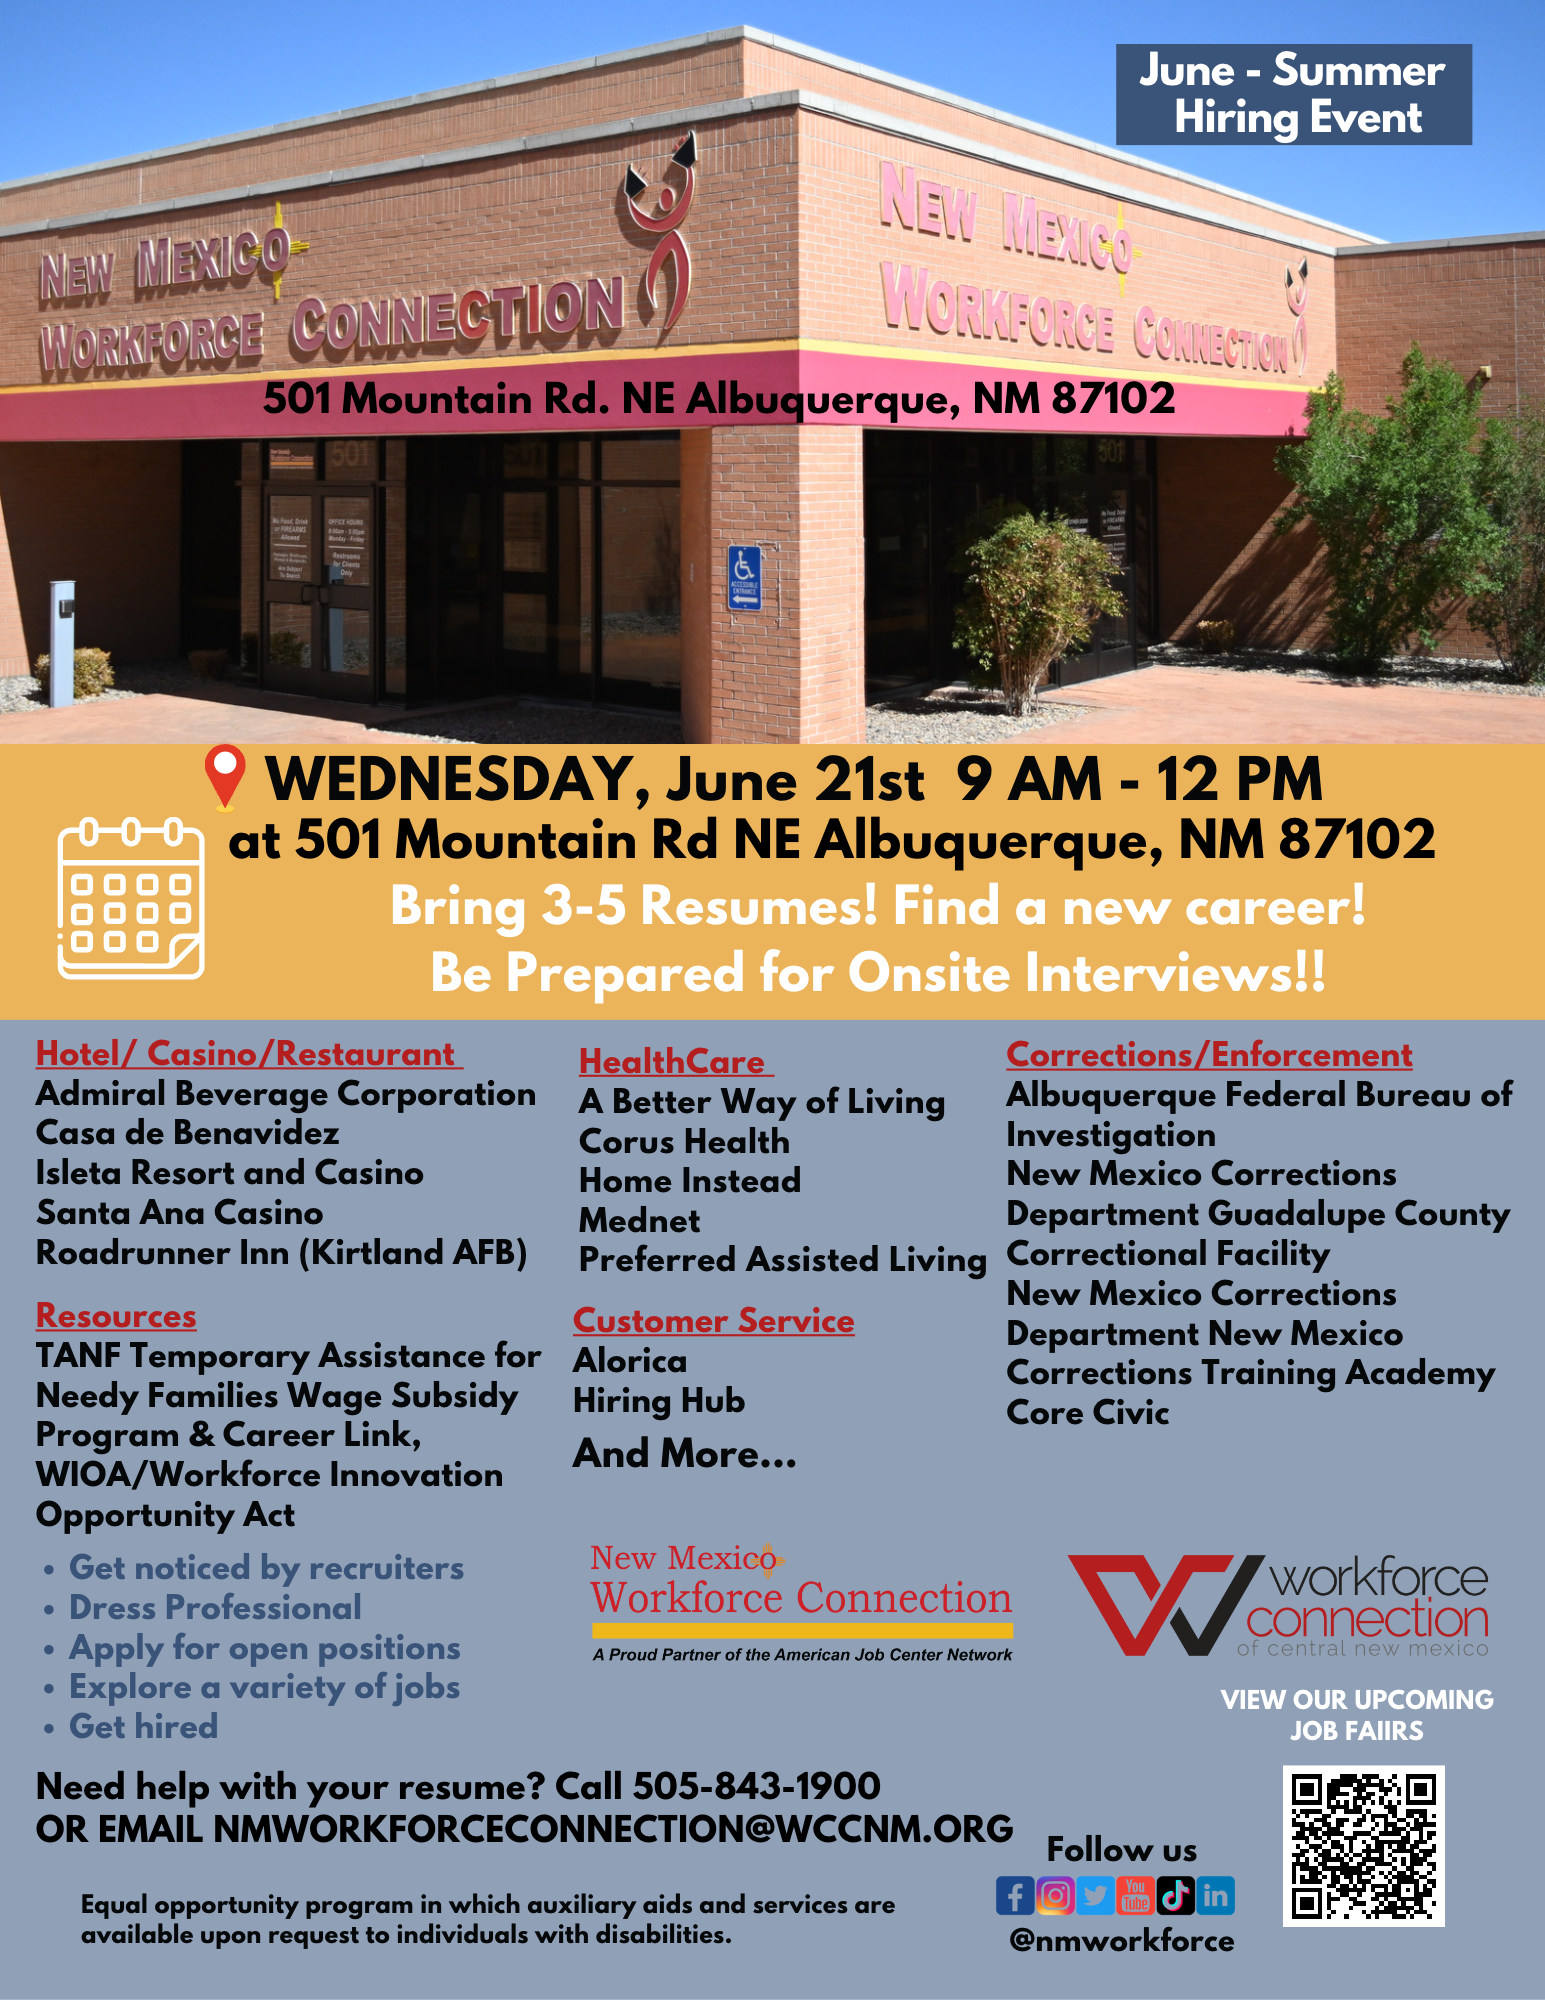 New Mexico Workforce Connection flyer